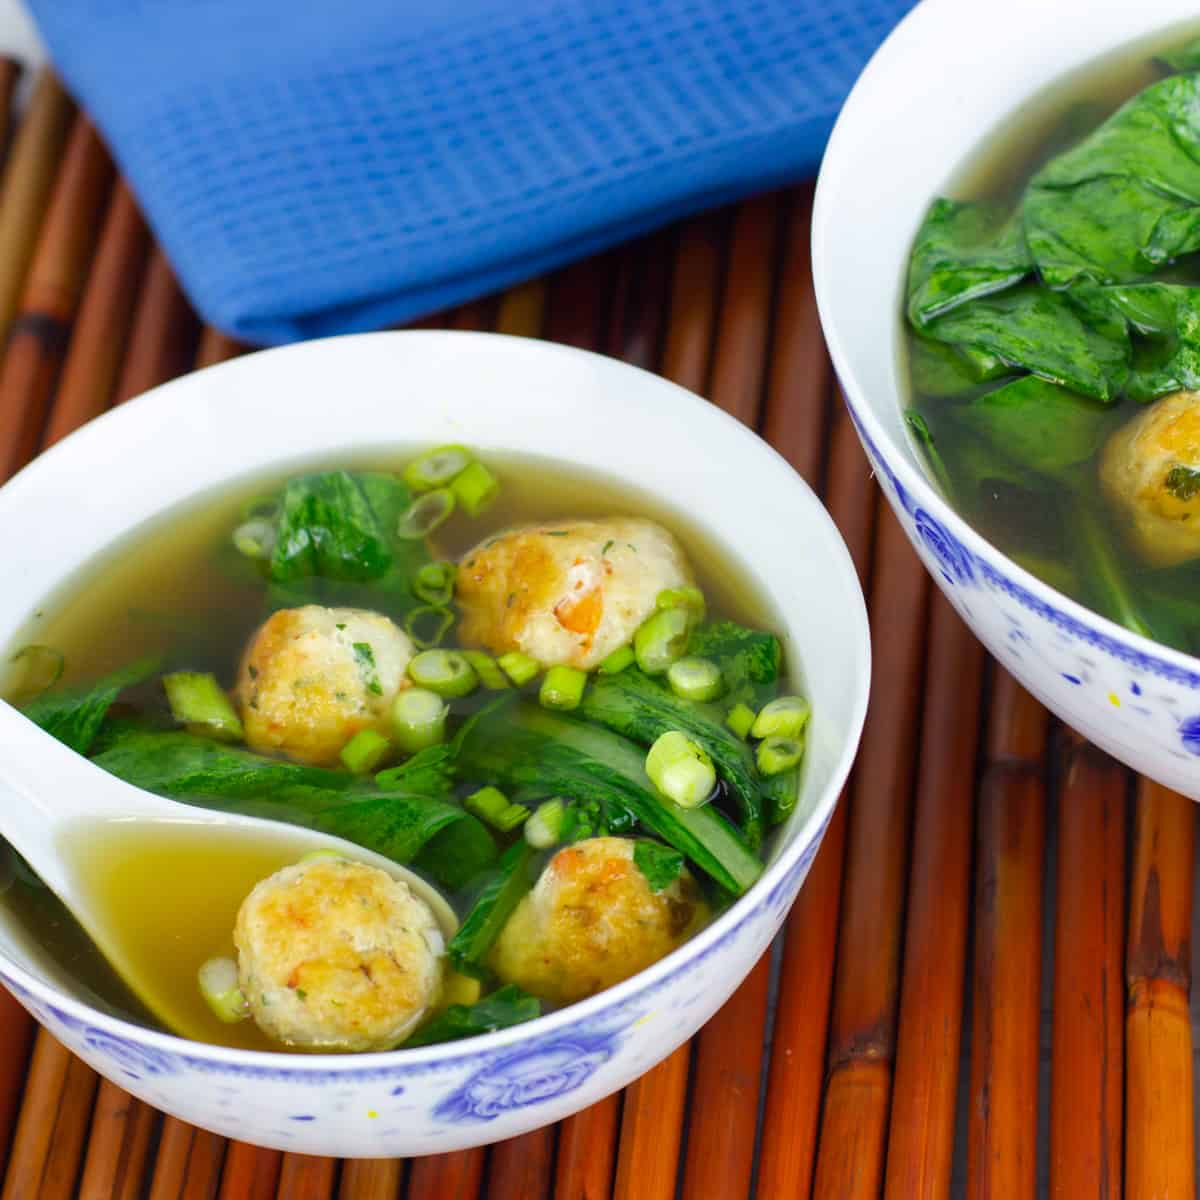 A bowl of soup with meatballs and Chinese greens